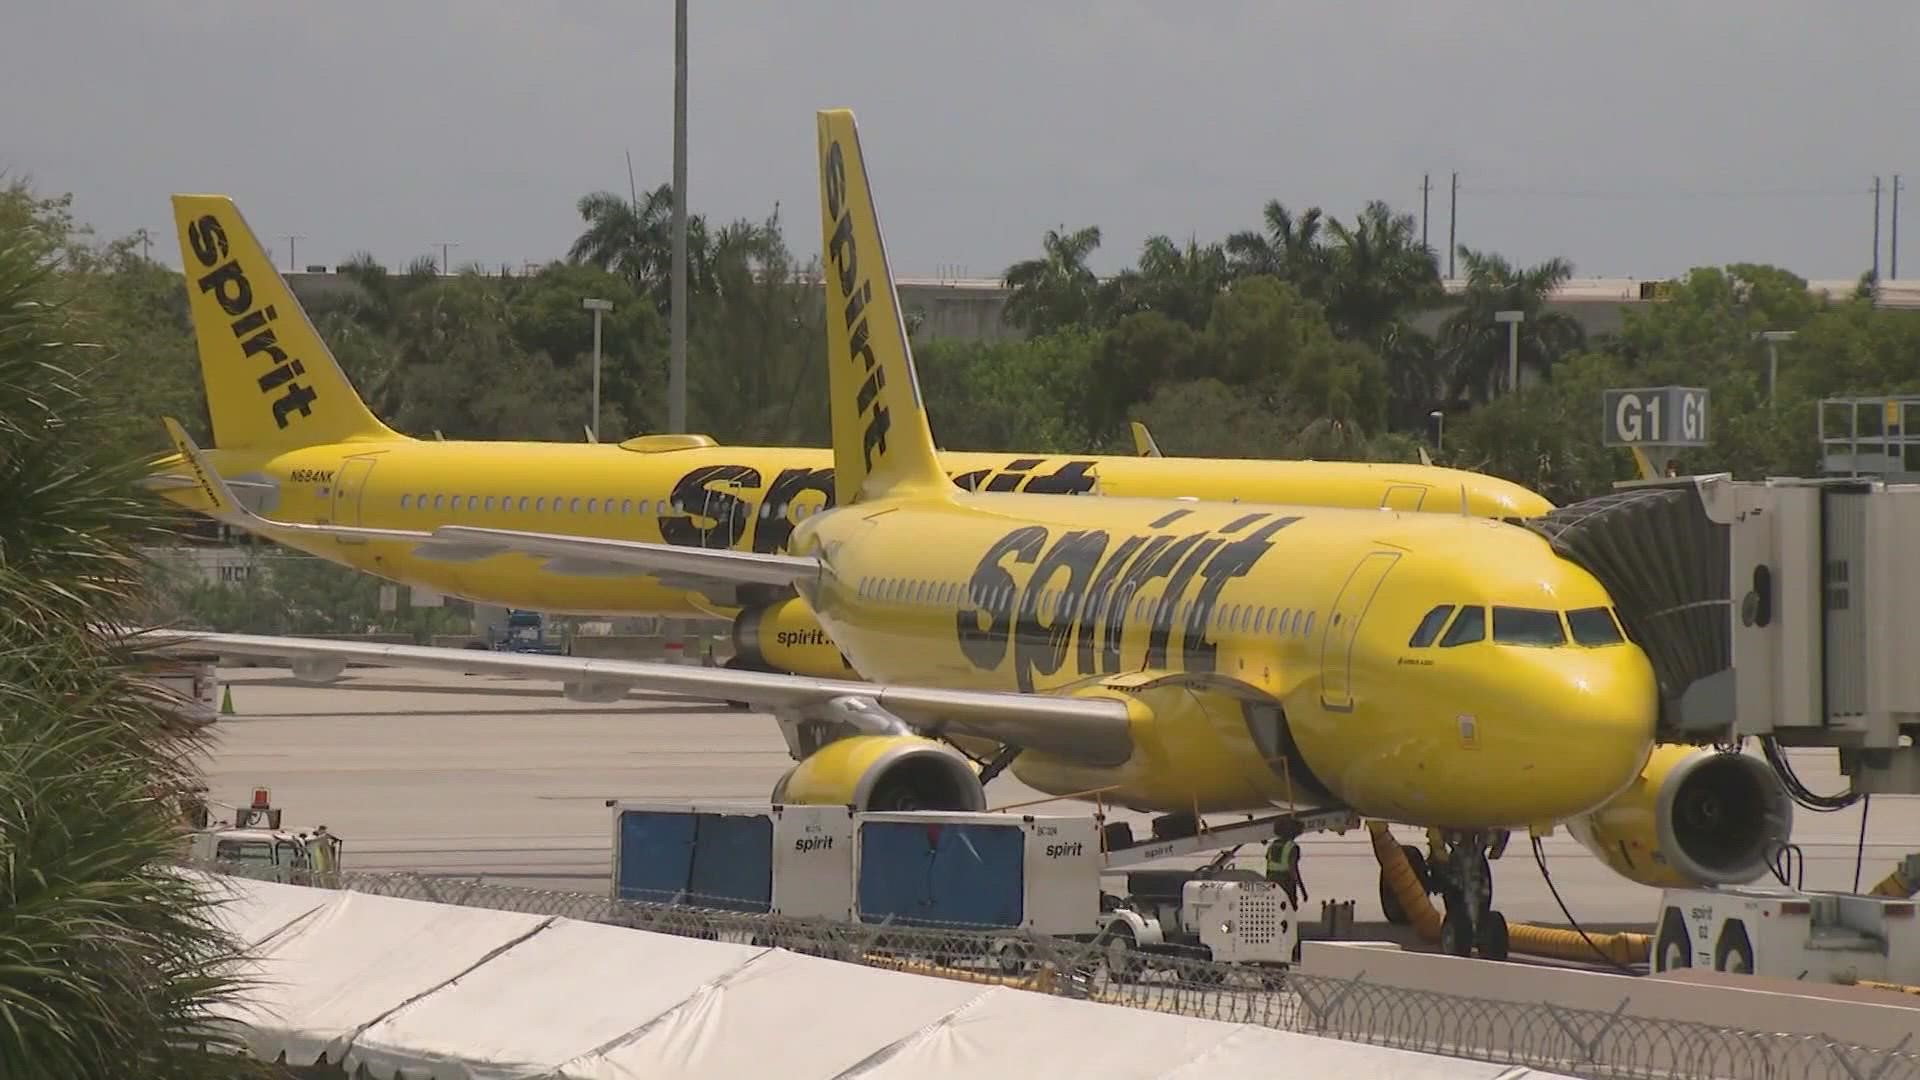 Spirit Airlines is looking to merge with Frontier Airlines. If the deal goes through it would make Frontier the 5th largest carrier in the country.